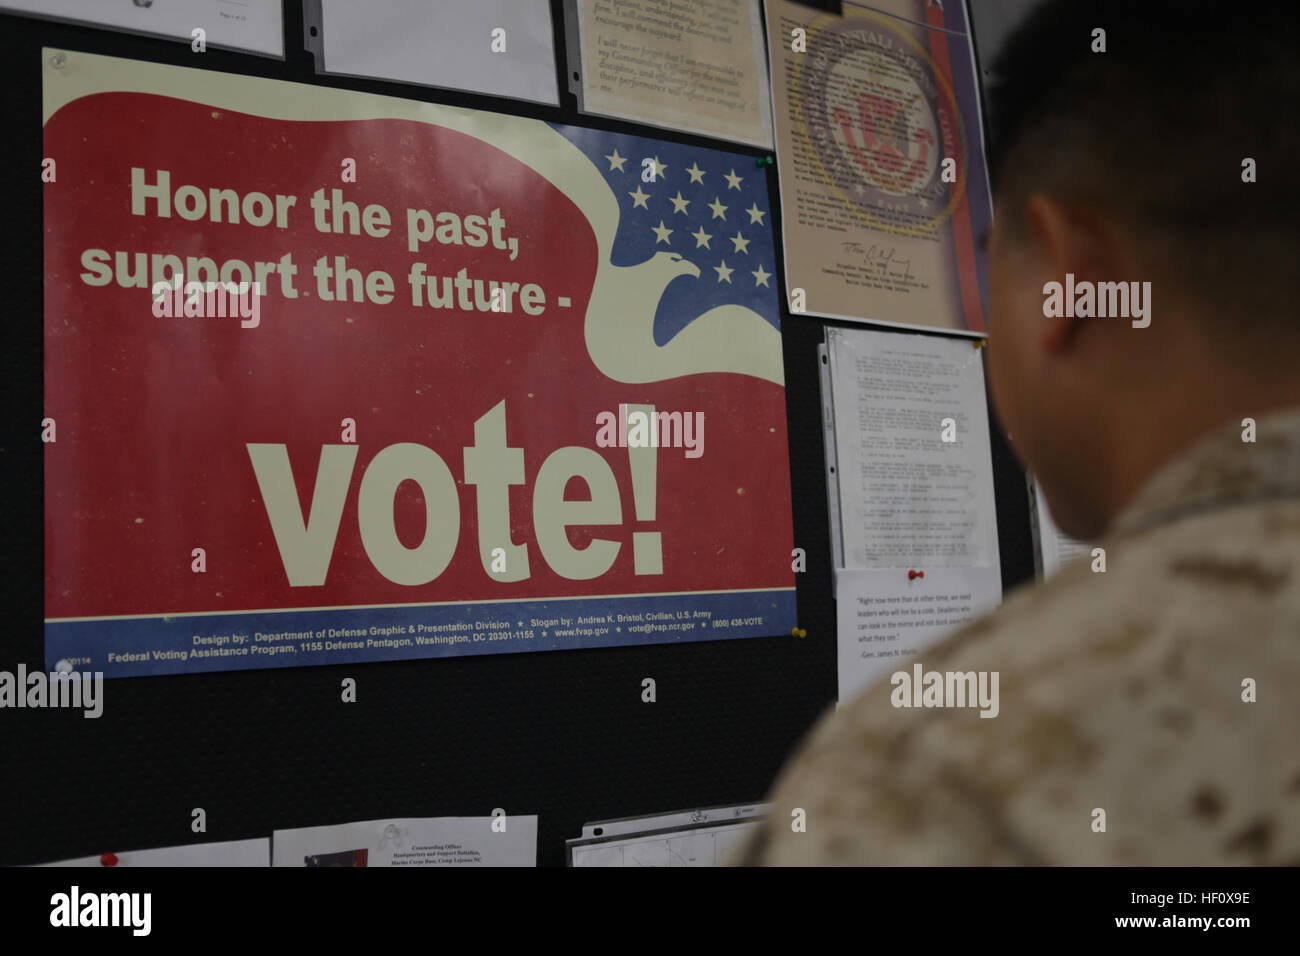 Posters encouraging Marines to engage the political systems they defend hang in various locations throughout Marine Corps Base Camp Lejeune. With their military lifestyles and professional requirements, Marines often find politics and profession to be a balancing act. While maximum participation in the electoral process is encouraged throughout the Marine Corps, the guidelines laid out in Department of Defense Directive 1344.10 are readily available to Marines walking the politics-profession tightrope as they perform their civic and military duties. Election season calls for caution, professio Stock Photo